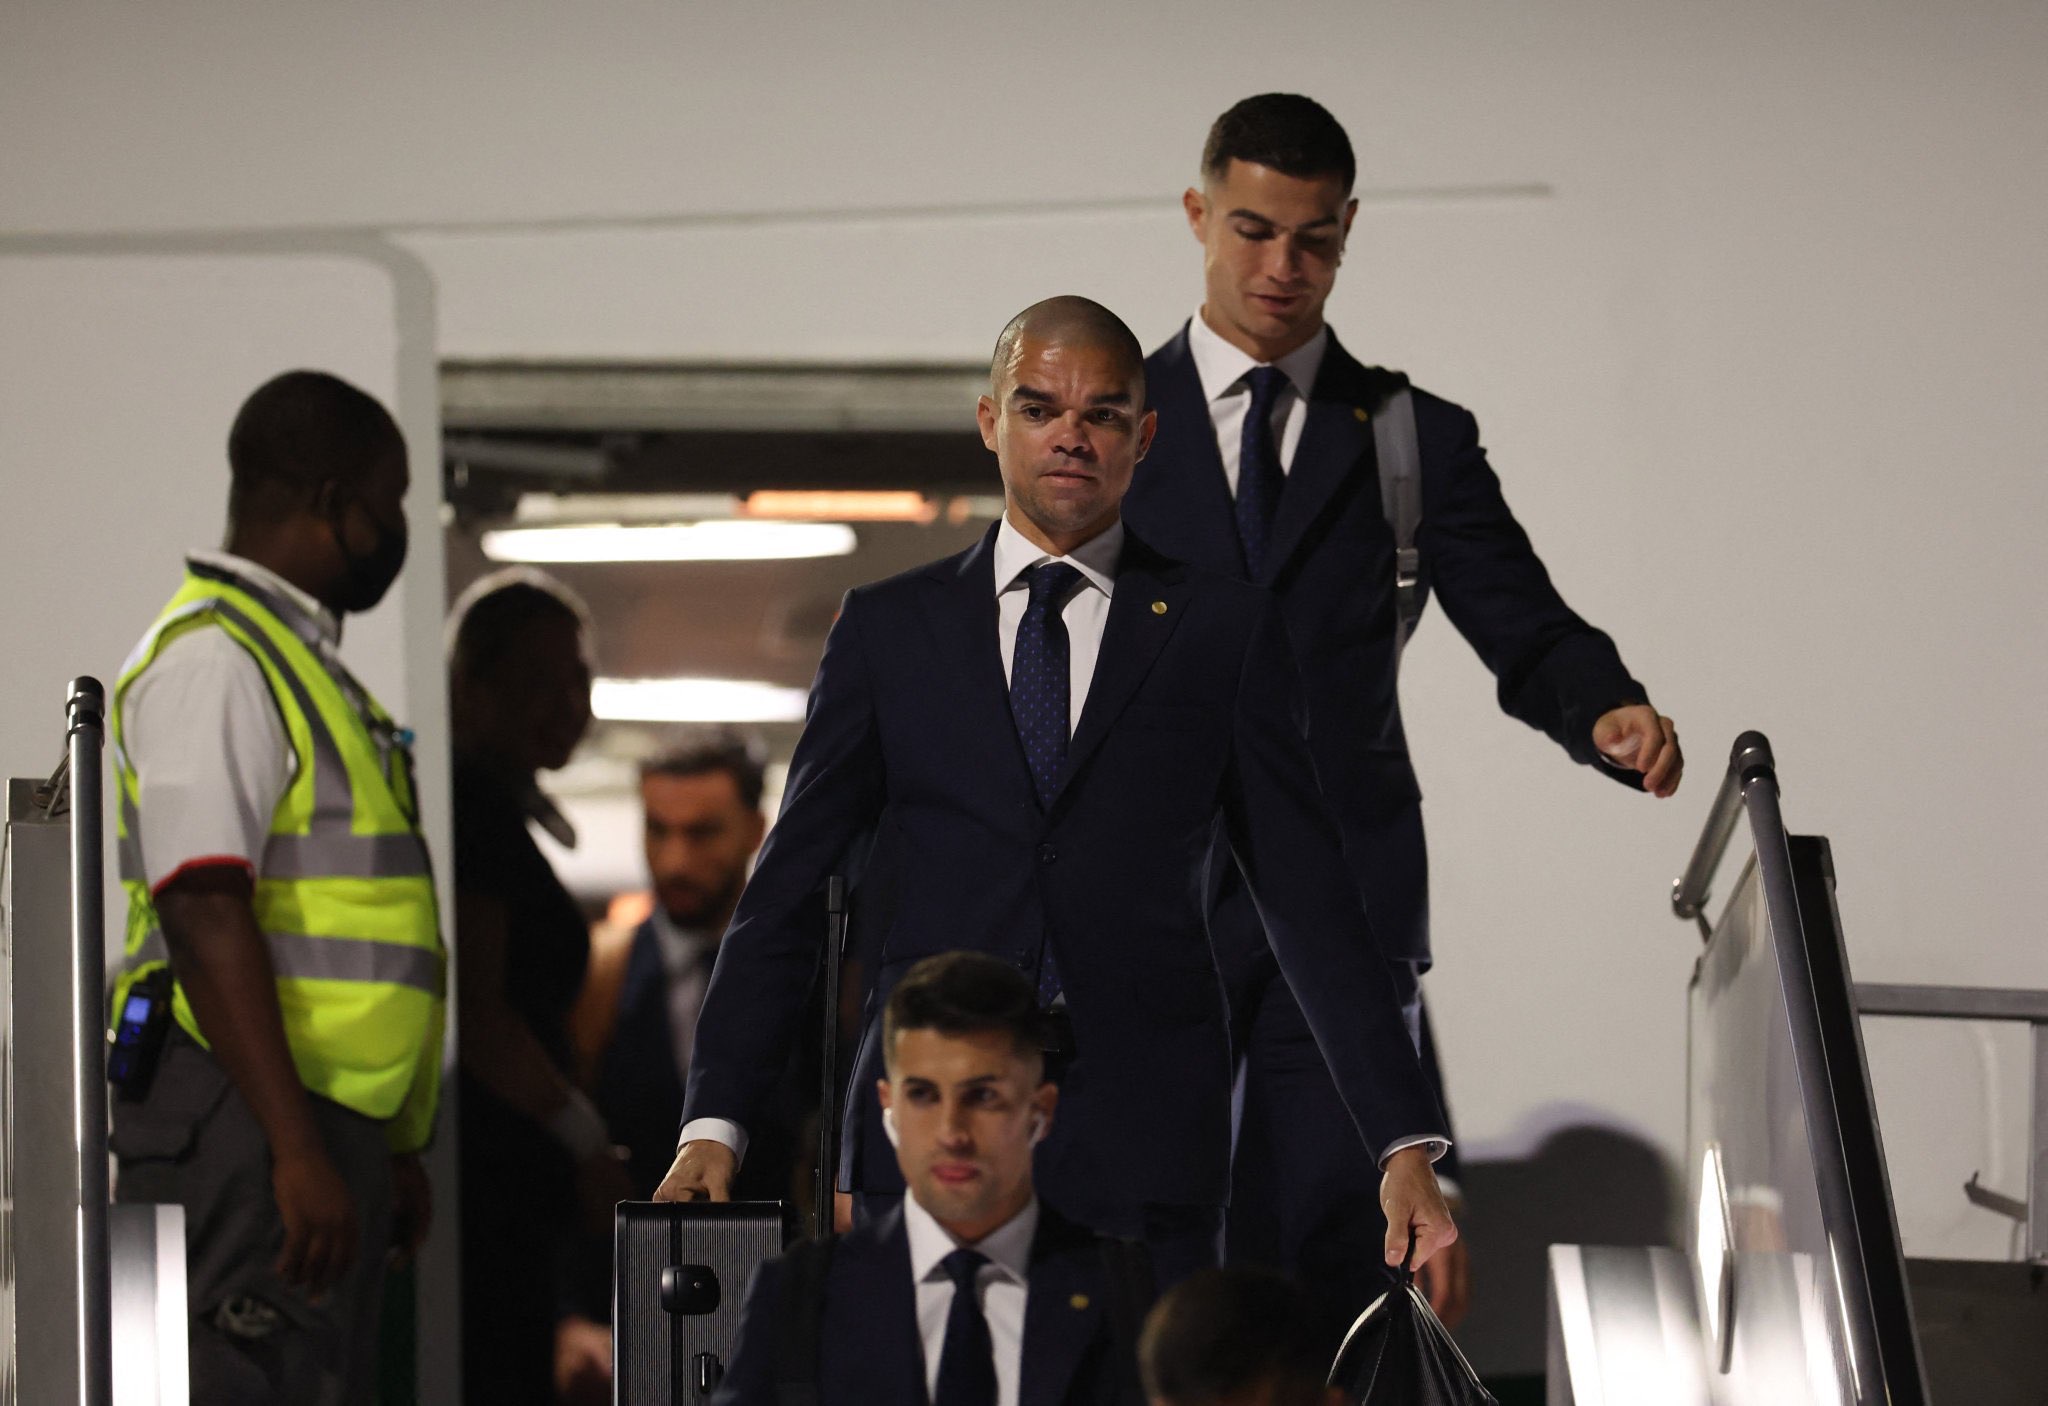 FIFA World Cup: With Manchester United career DOOMED, Cristiano Ronaldo arrives in Qatar in style along with Team Portugal - CHECK out